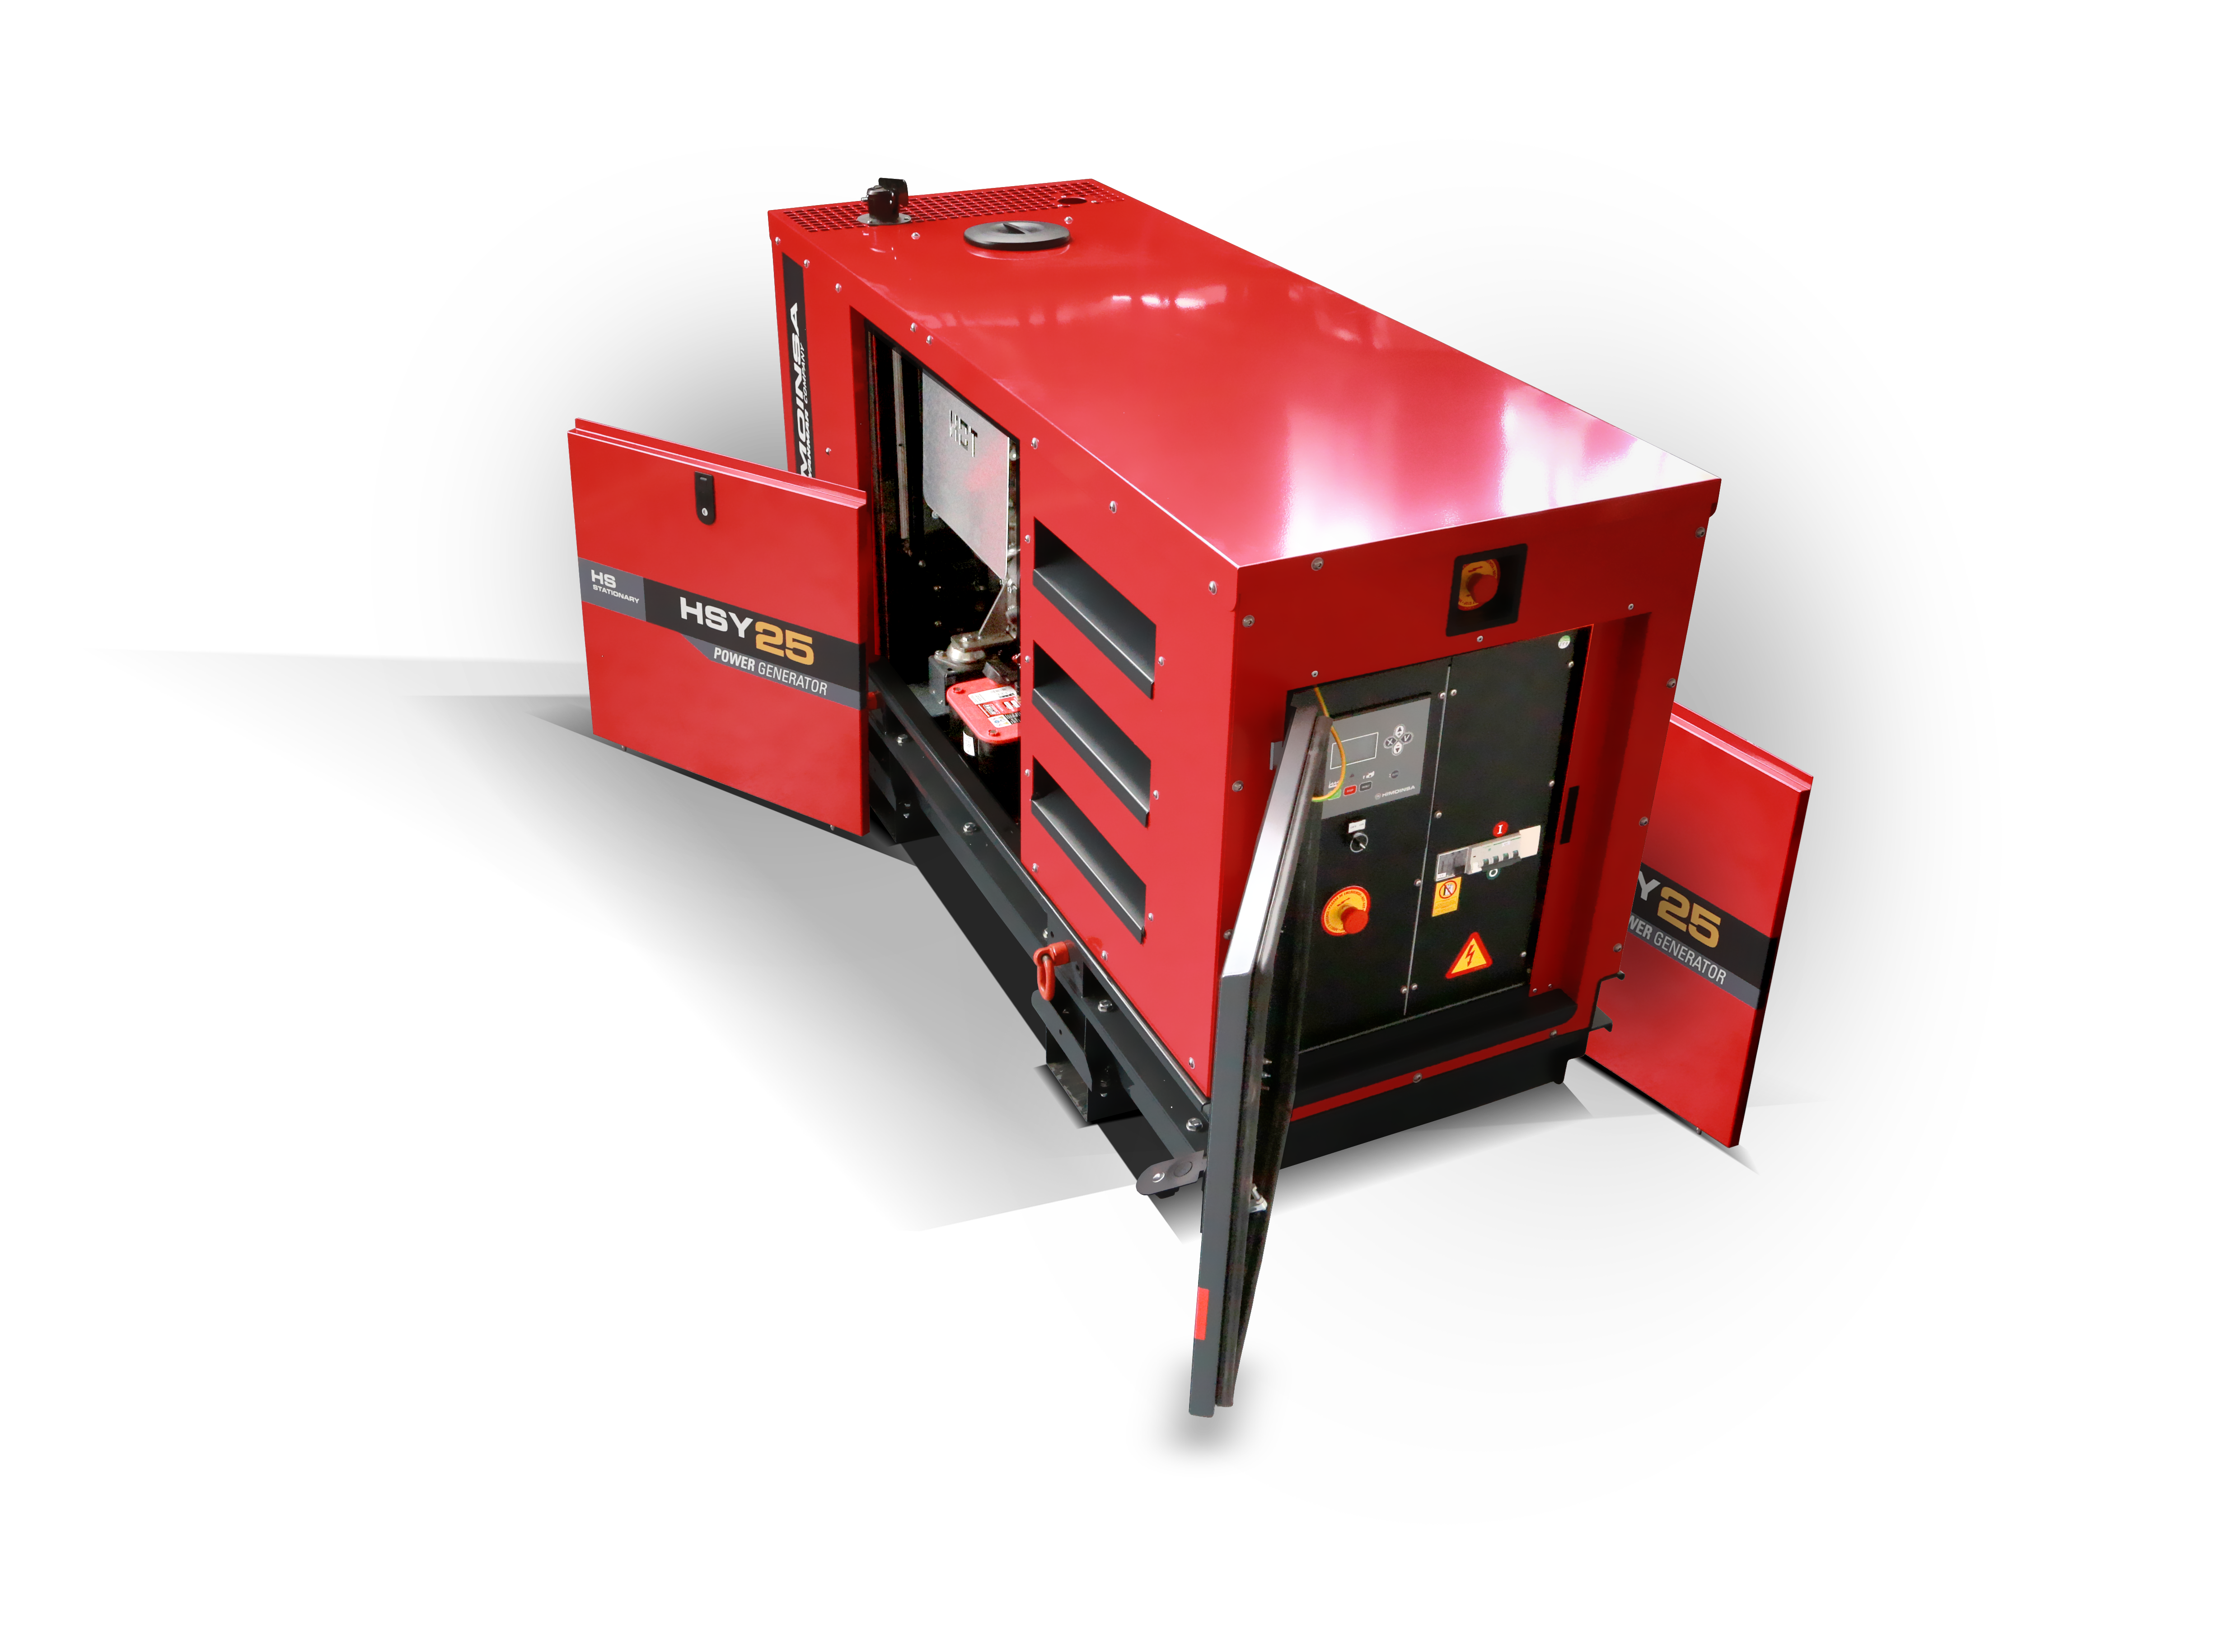 Generators for stationary applications are now also available with emission compliant engines